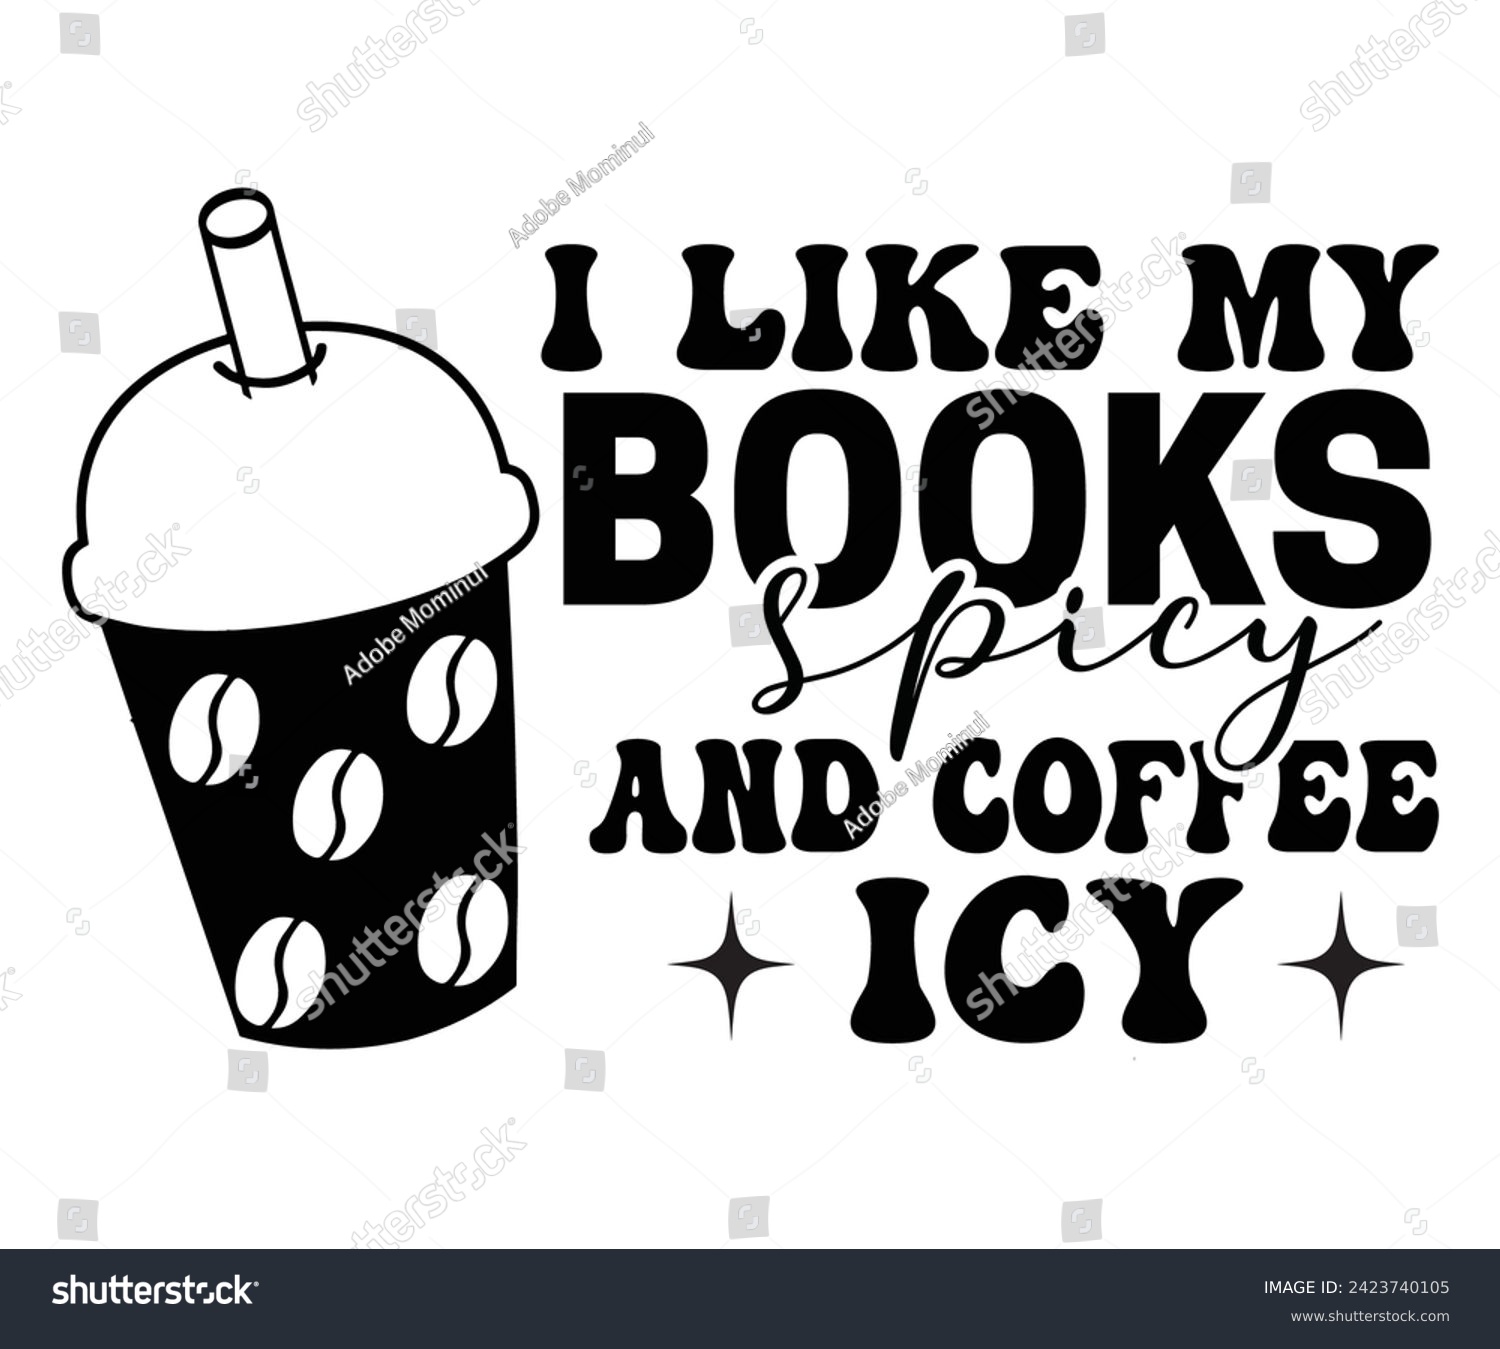 SVG of I Like My Books Spicy And Coffee Icy,Coffee Svg,Coffee Retro,Funny Coffee Sayings,Coffee Mug Svg,Coffee Cup Svg,Gift For Coffee,Coffee Lover,Caffeine Svg,Svg Cut File,Coffee Quotes,Sublimation Design, svg